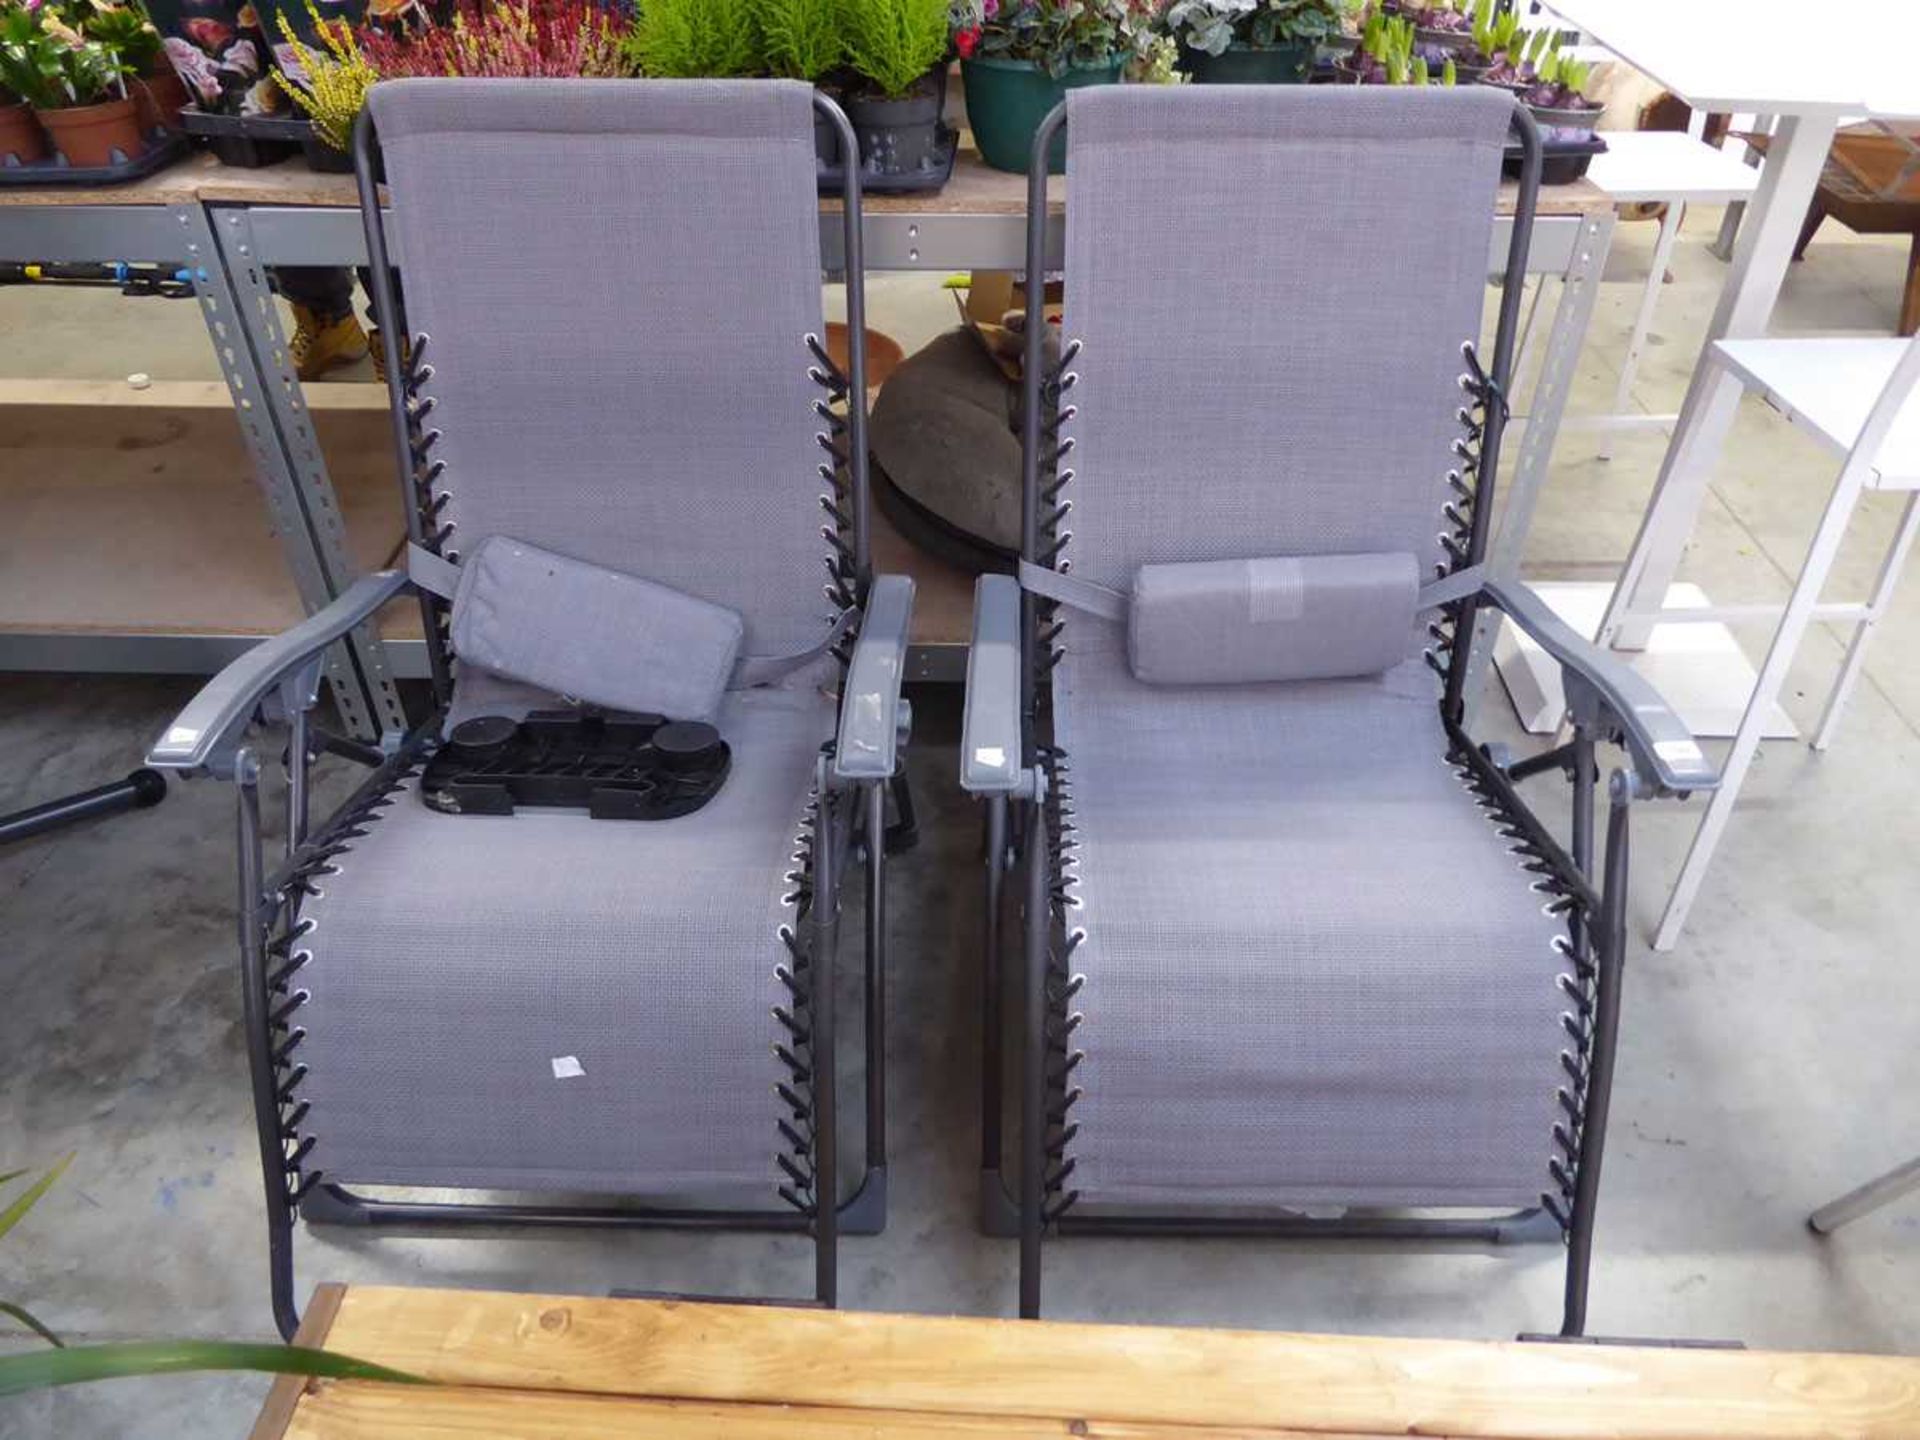 Pair of grey and black mesh sun loungers